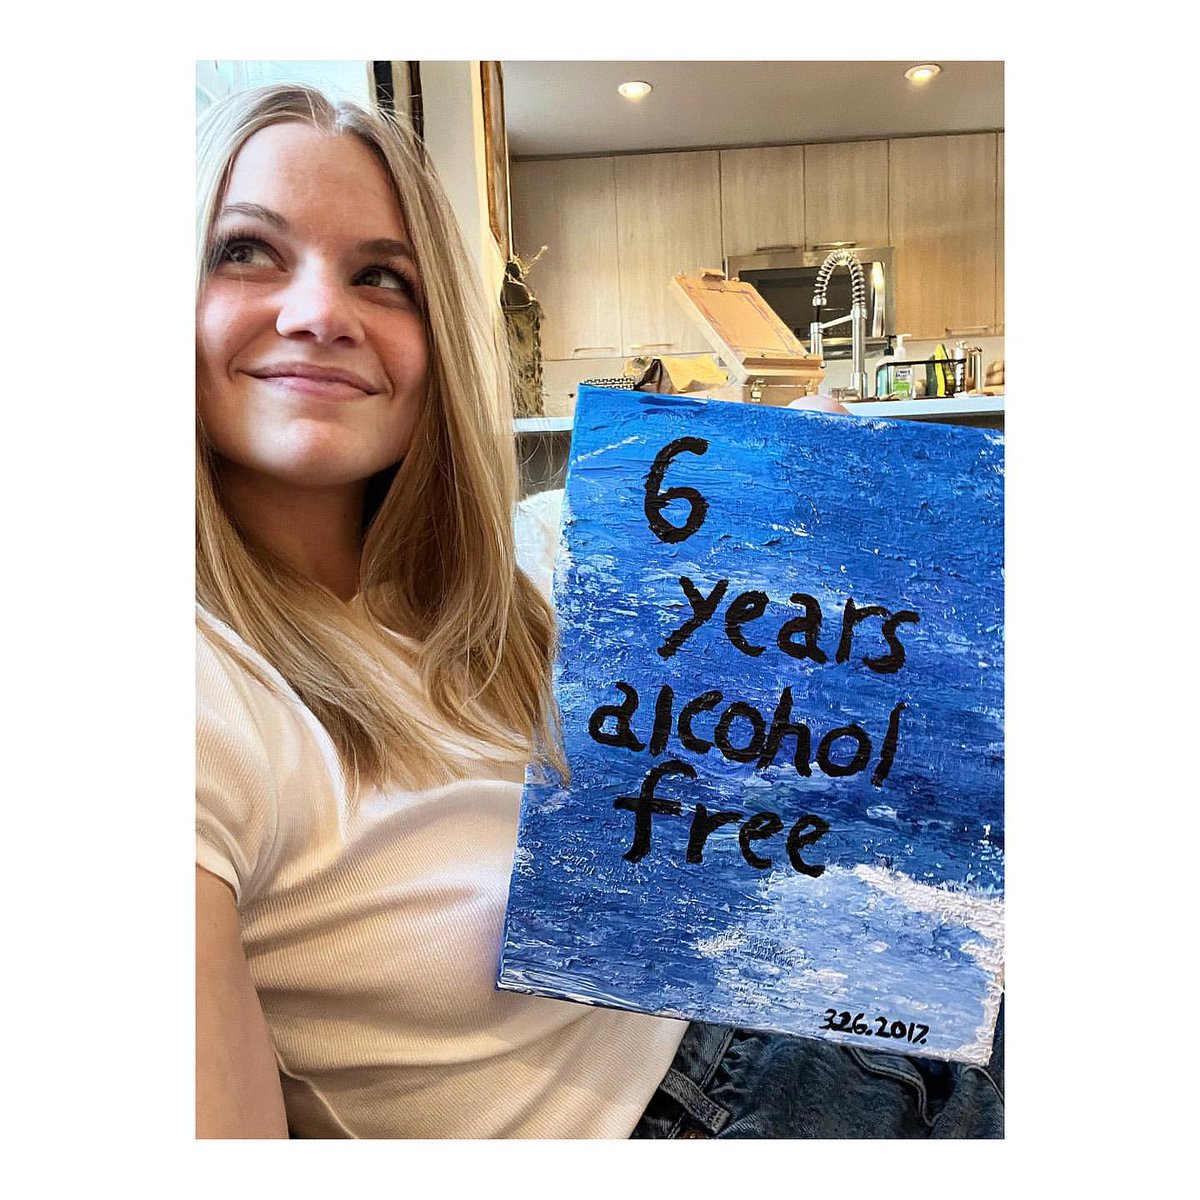 Today, I’m 6 years alcohol free.